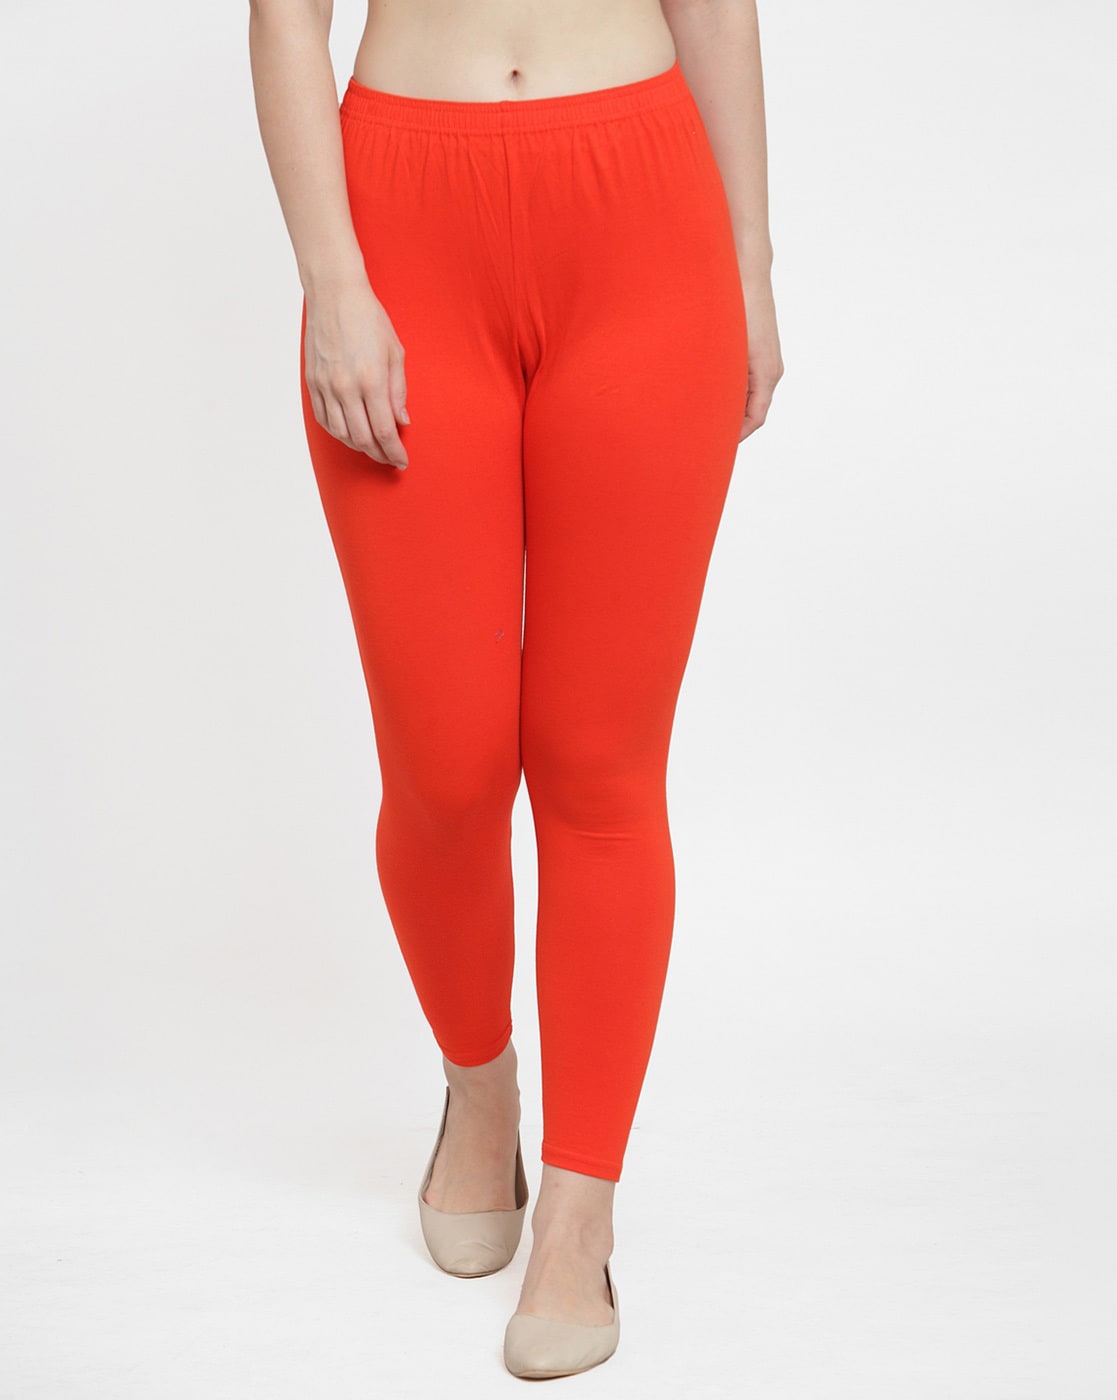 Buy Kex Red Orange Solid Cotton Churidar Length Leggings women Leggings  Girls Leggings Leggings for women Ruby Leggings Online at Best Prices in  India - JioMart.